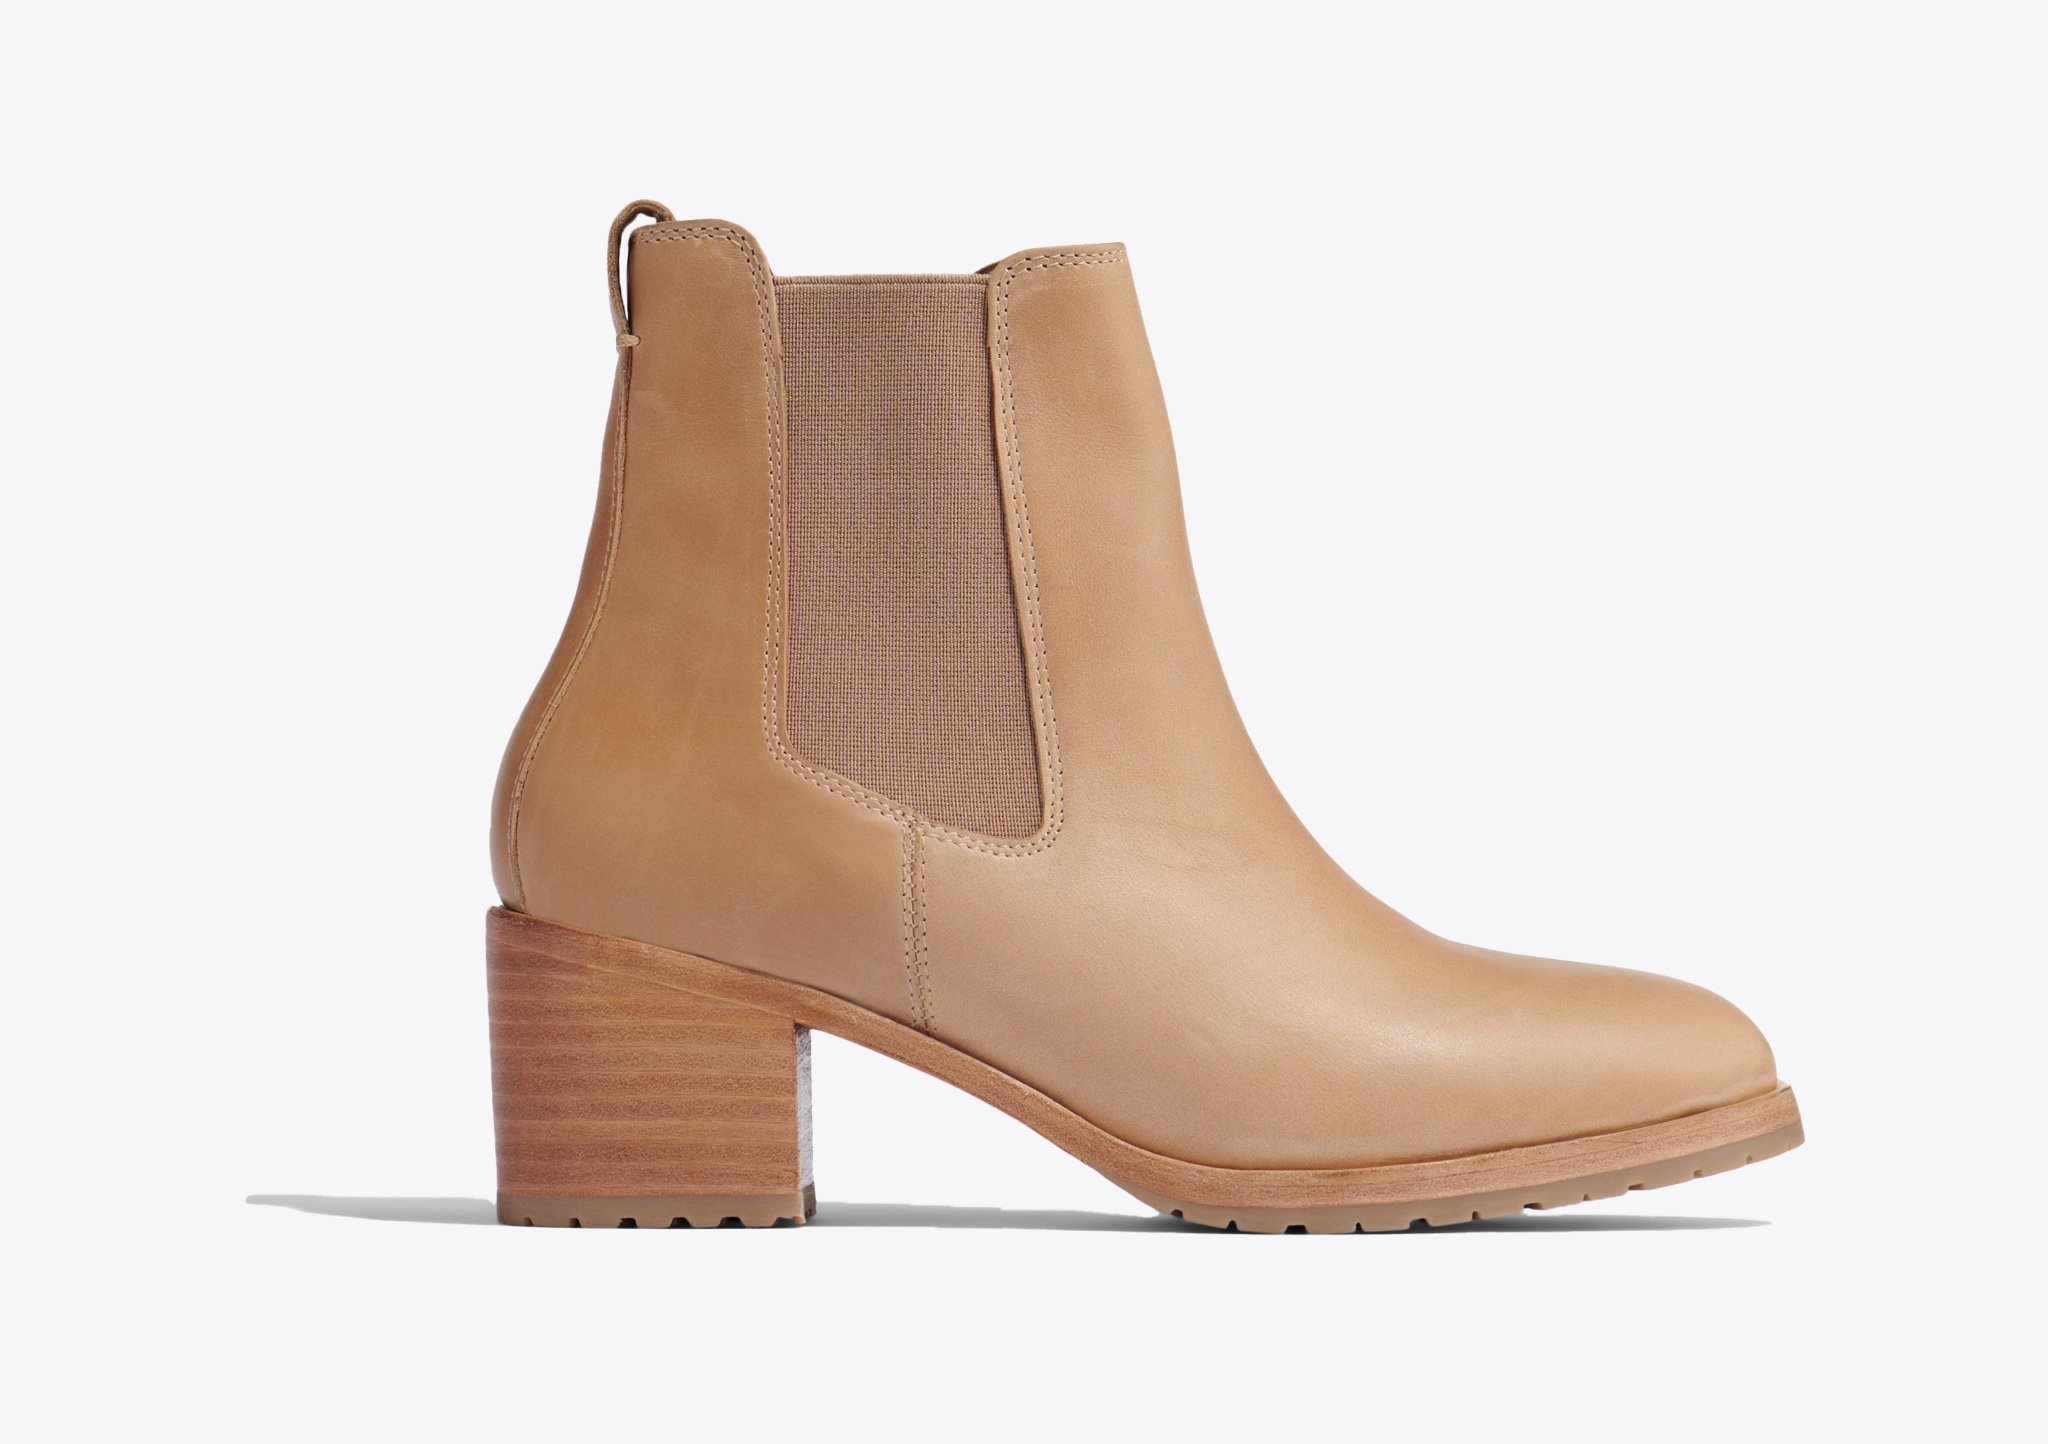 Nisolo Ana Go-To Heeled Chelsea Boot Almond - Every Nisolo product is built on the foundation of comfort, function, and design. 